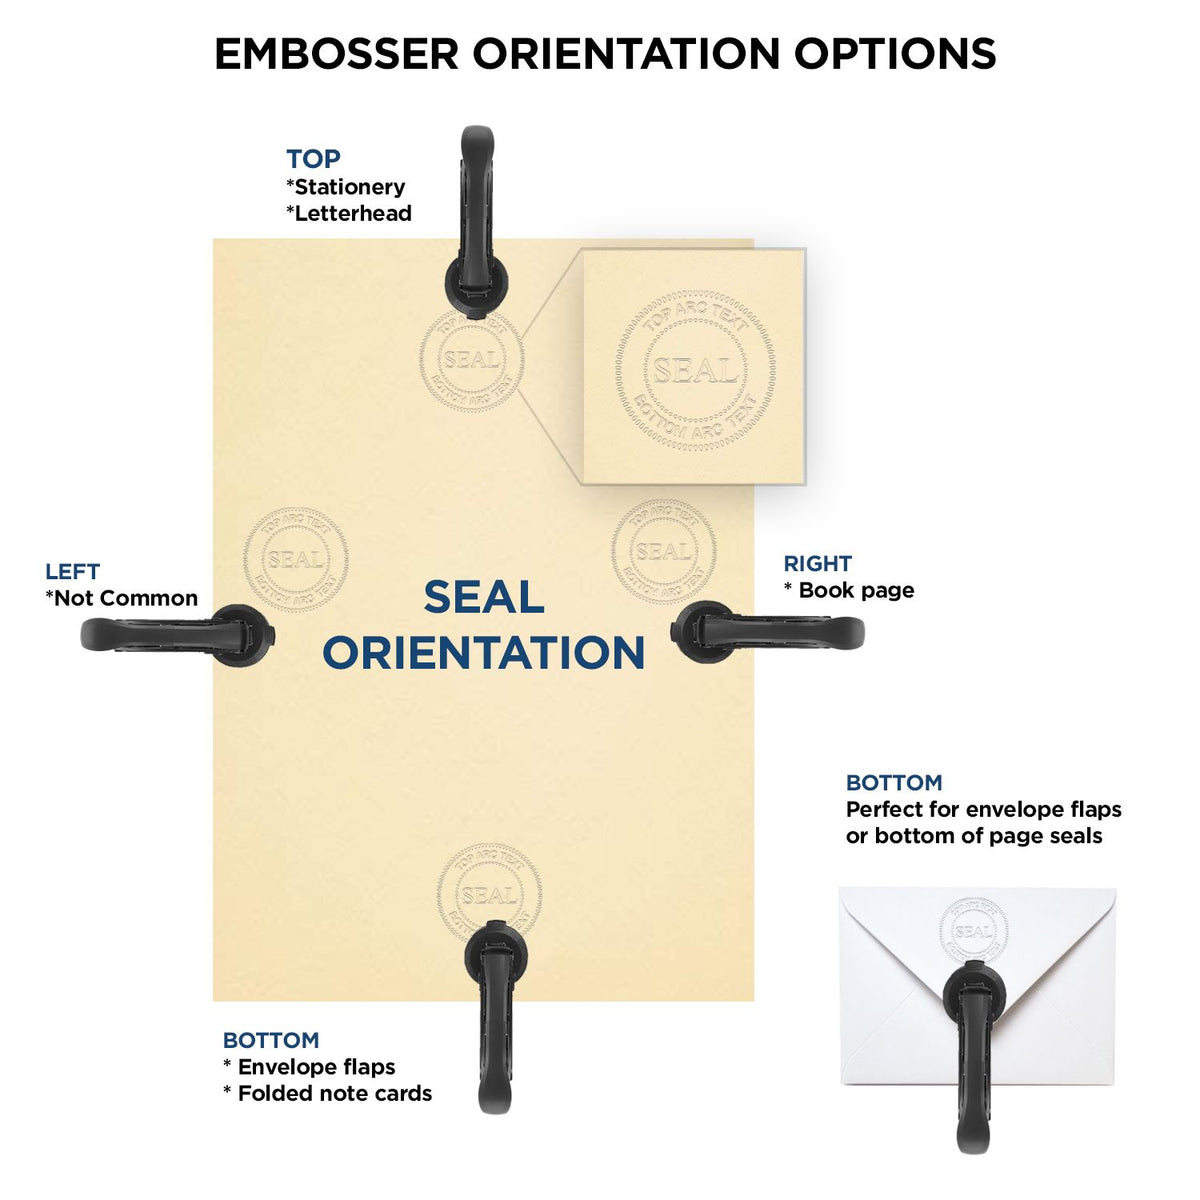 An infographic for the Long Reach Minnesota Land Surveyor Seal showing embosser orientation, this is showing examples of a top, bottom, right and left insert.